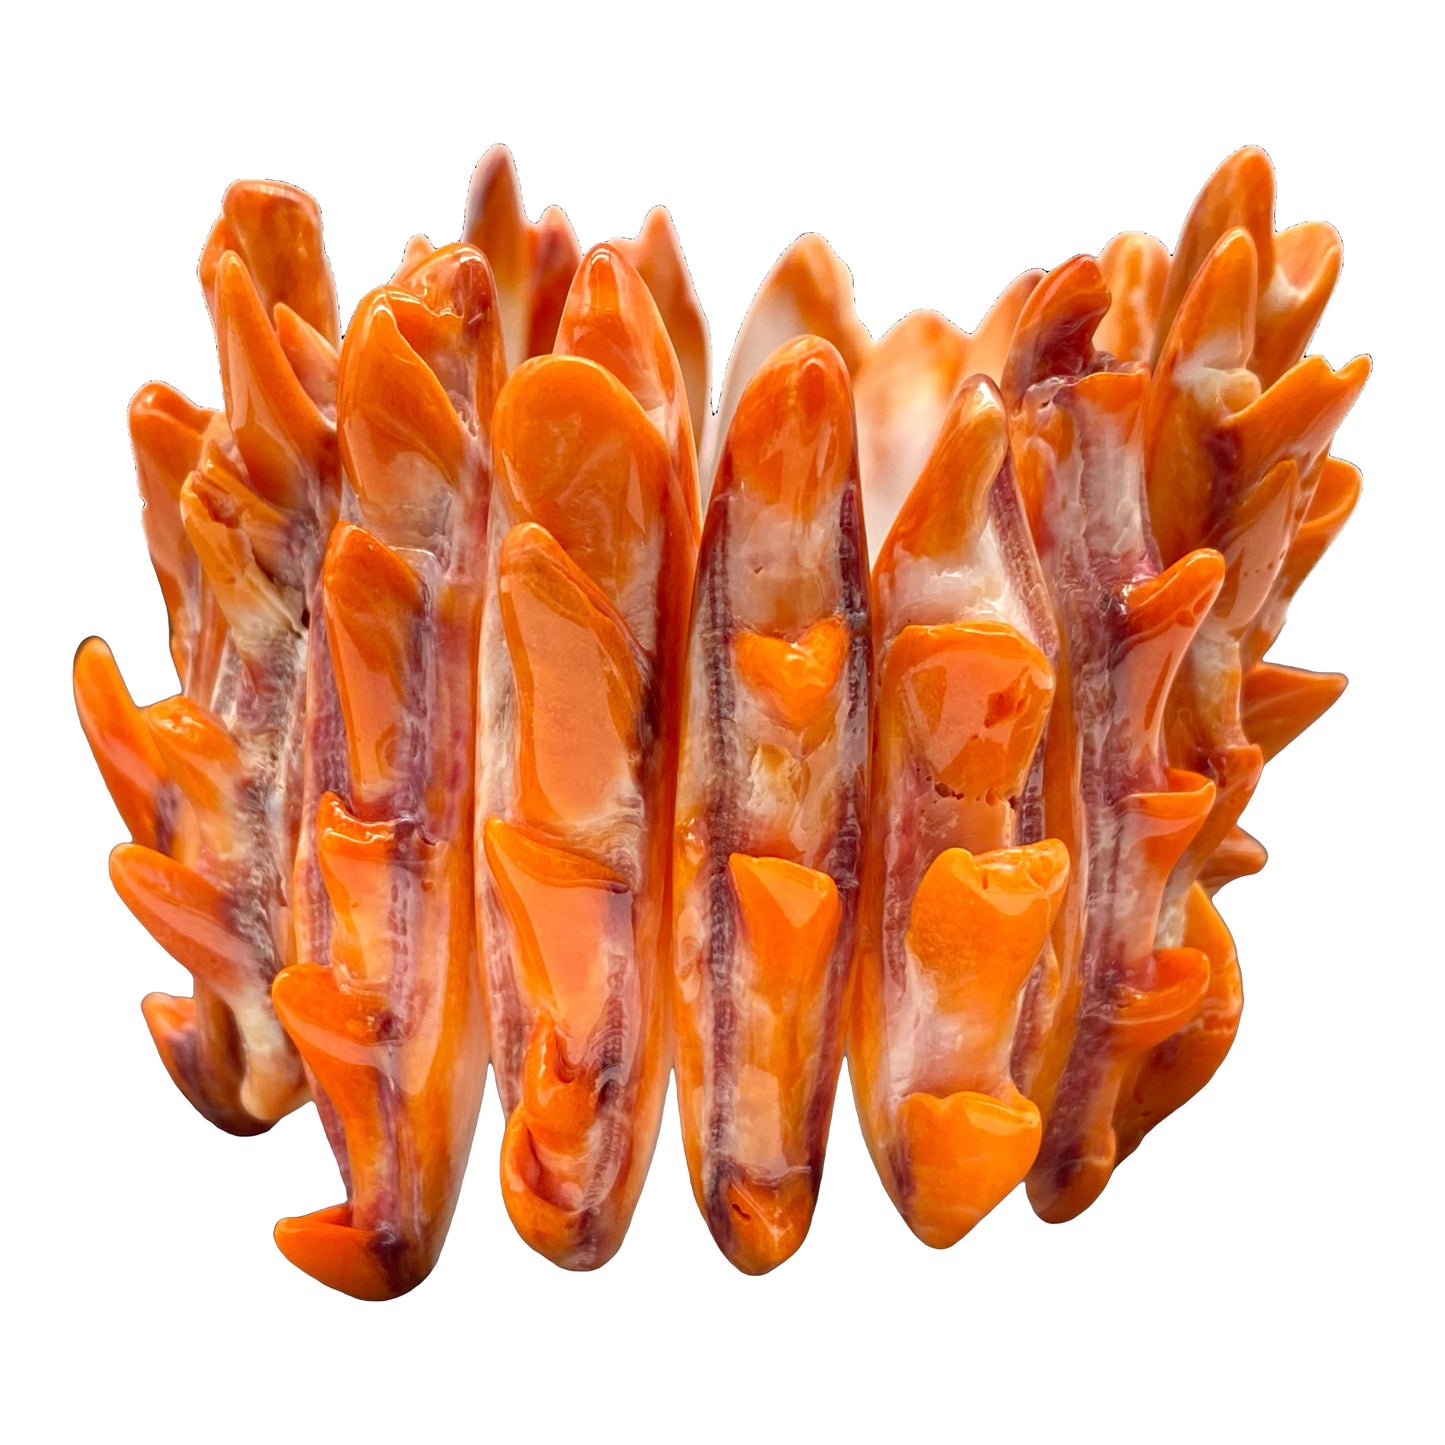 Gigantic Mexican Sunset-Orange Spiny Oyster Shell Elastic Bracelet (Organic Spines- Photo Doesn't Do It Justice)